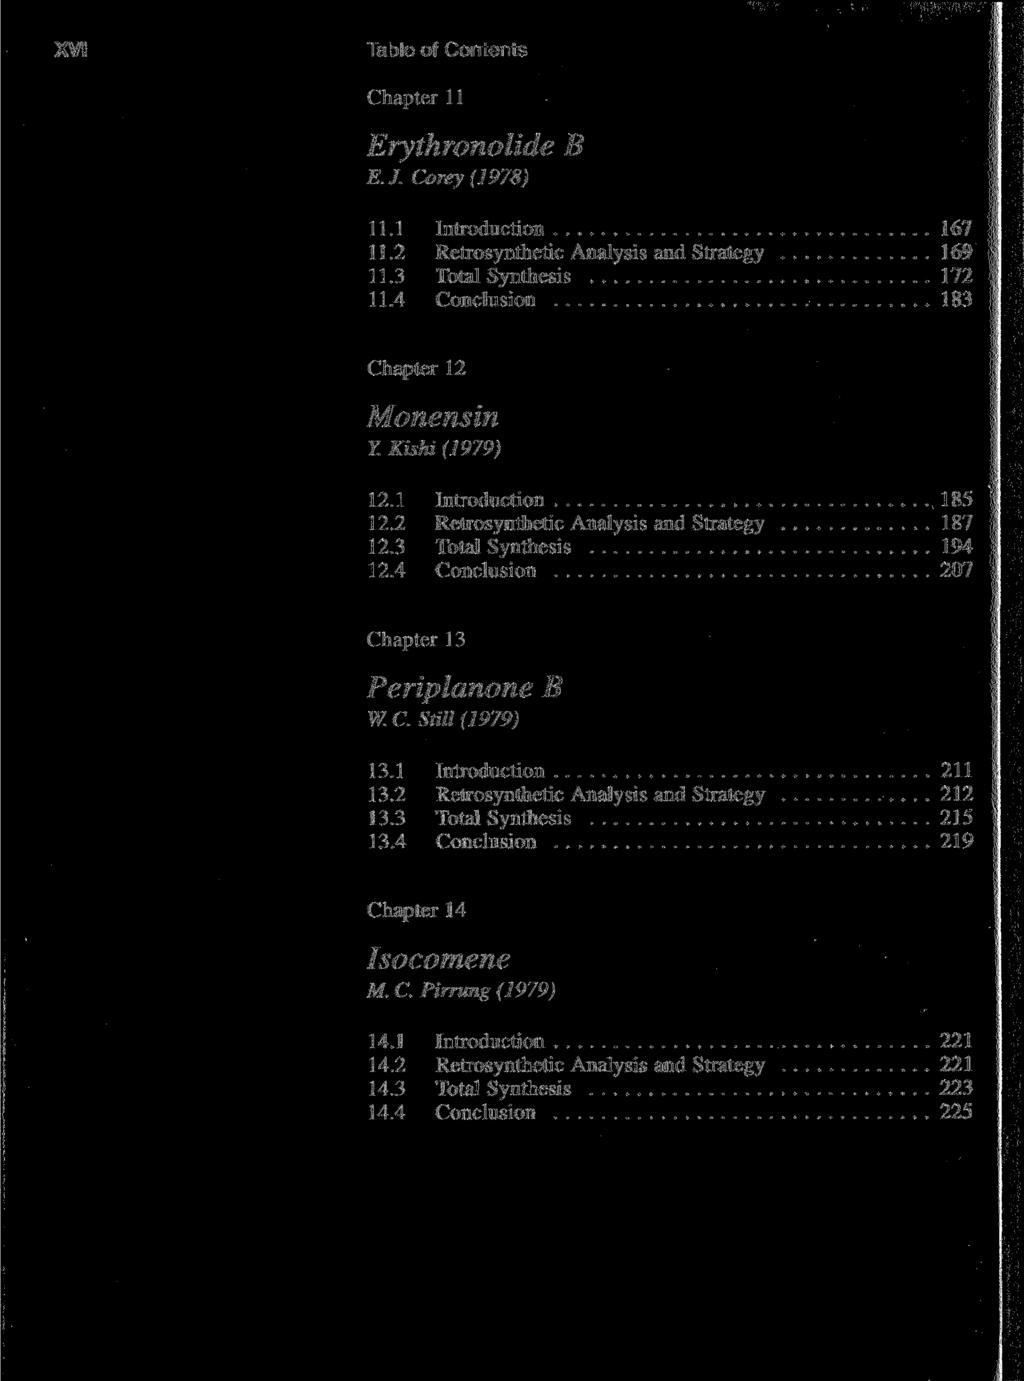 XVI Table of Contents Chapter 11 Erythronolide E. J. Corey (1978) B 11.1 Introduction 167 11.2 Retrosynthetic Analysis and Strategy 169 11.3 Total Synthesis 172 11.